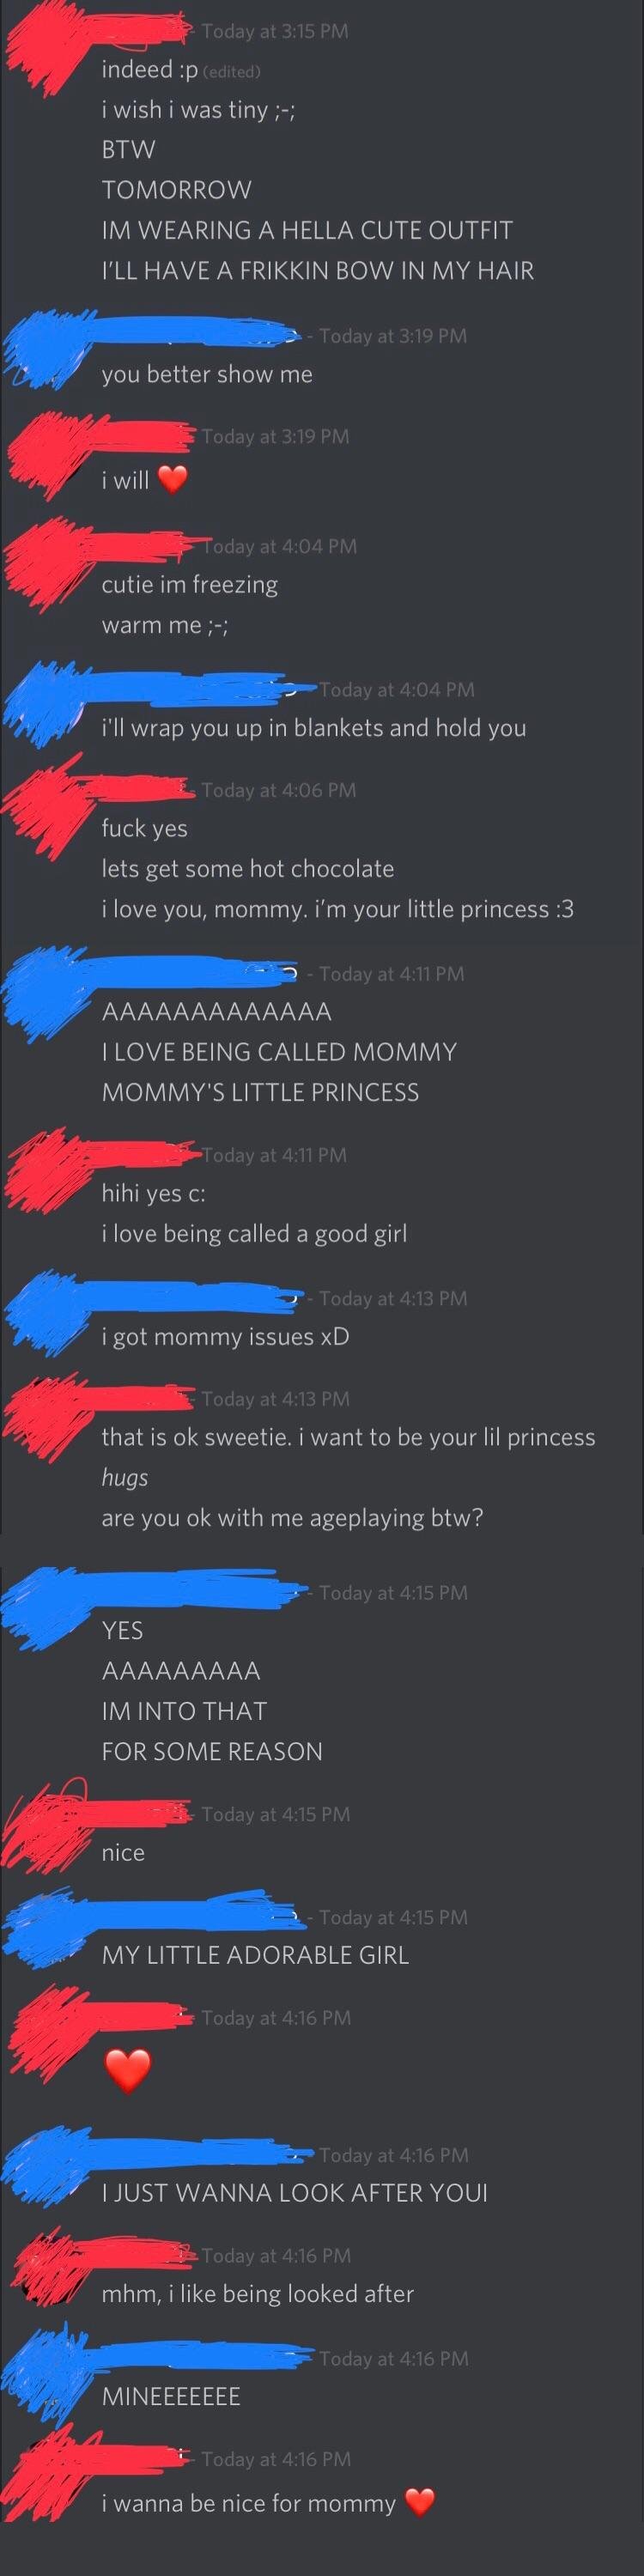 I came out to my girlfriend as a little; she took it better than expected